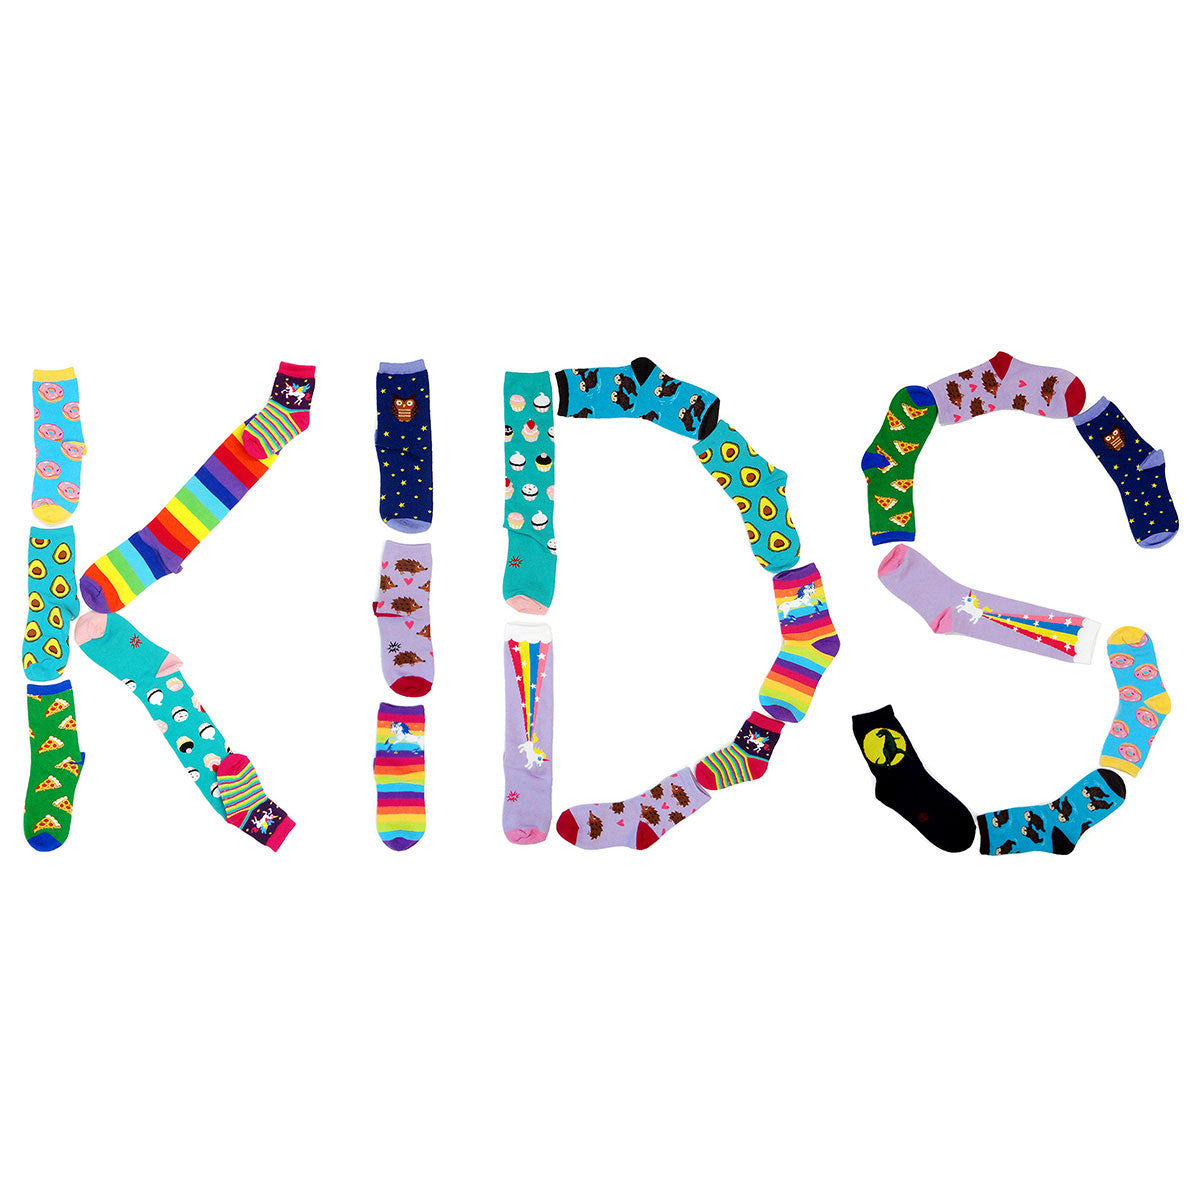 Cute socks with animals, food and rainbow stripes from our Kids' Socks collection spell out the word "KIDS."